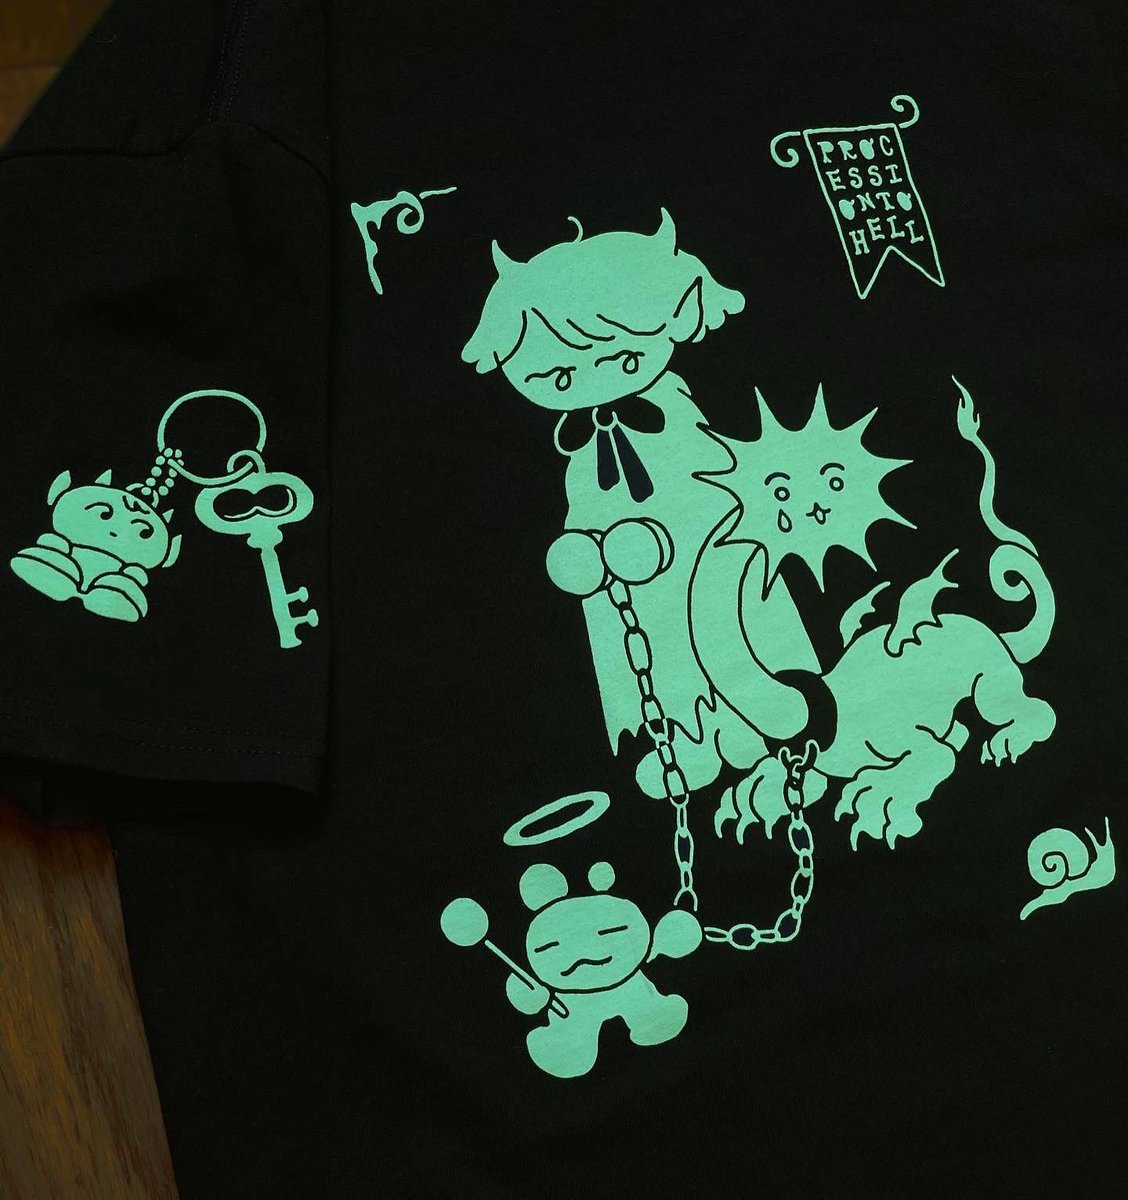 NEW ITEMS HAVE LANDED!!!
꩜ TV Totes in 2 colors
꩜ Procession to Hell t-shirts 
꩜ Snail Knight t-shirts 
are all in the shop now ~ so check it out! ฅ^രᆺ ര^ 